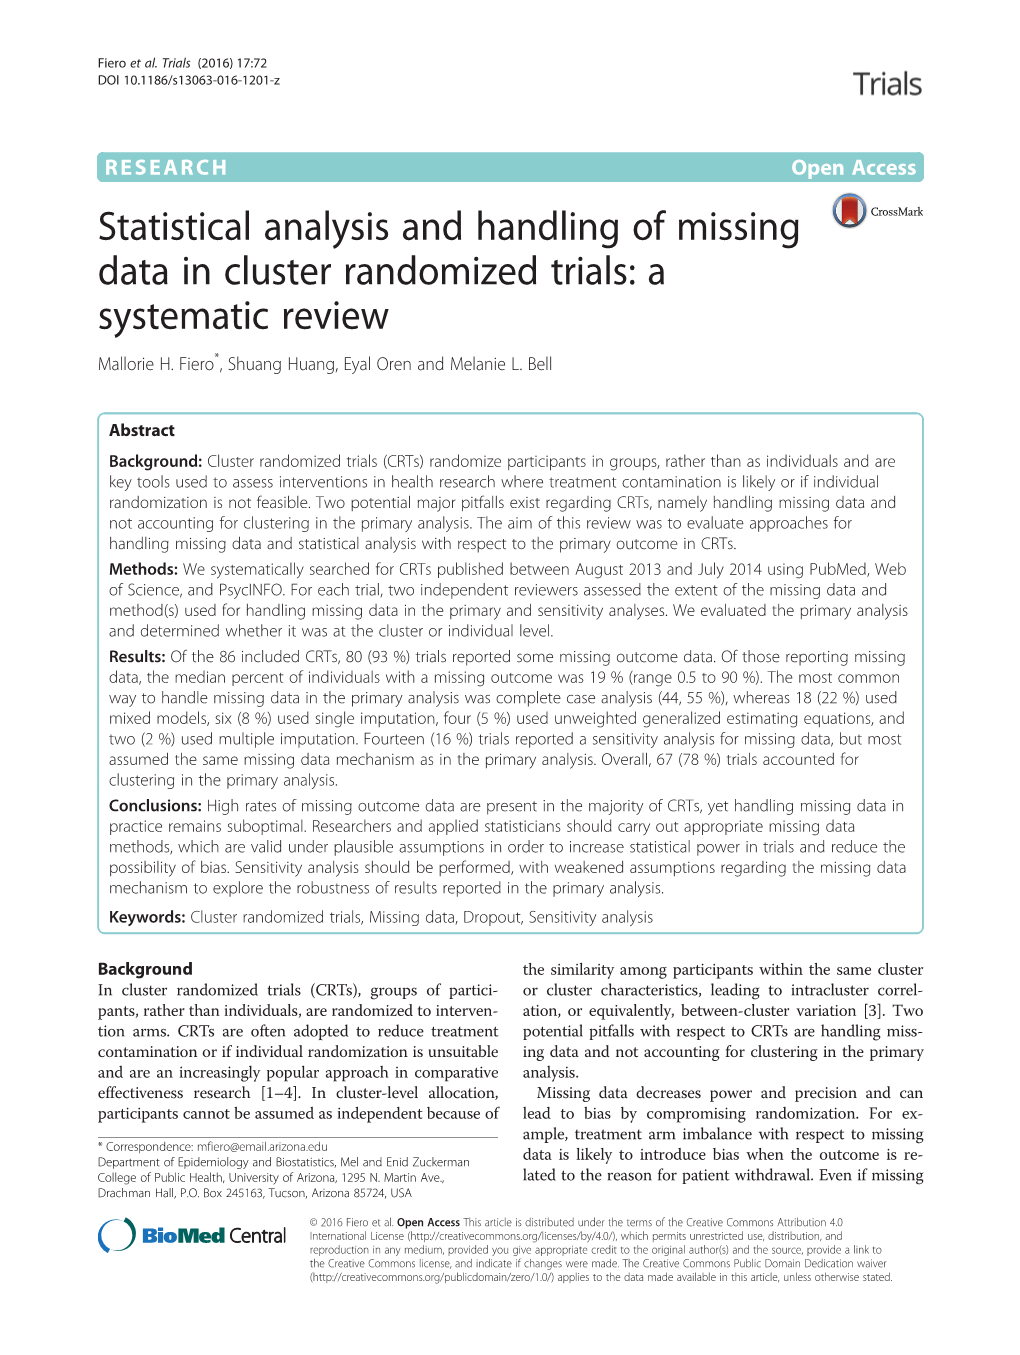 Statistical Analysis and Handling of Missing Data in Cluster Randomized Trials: a Systematic Review Mallorie H